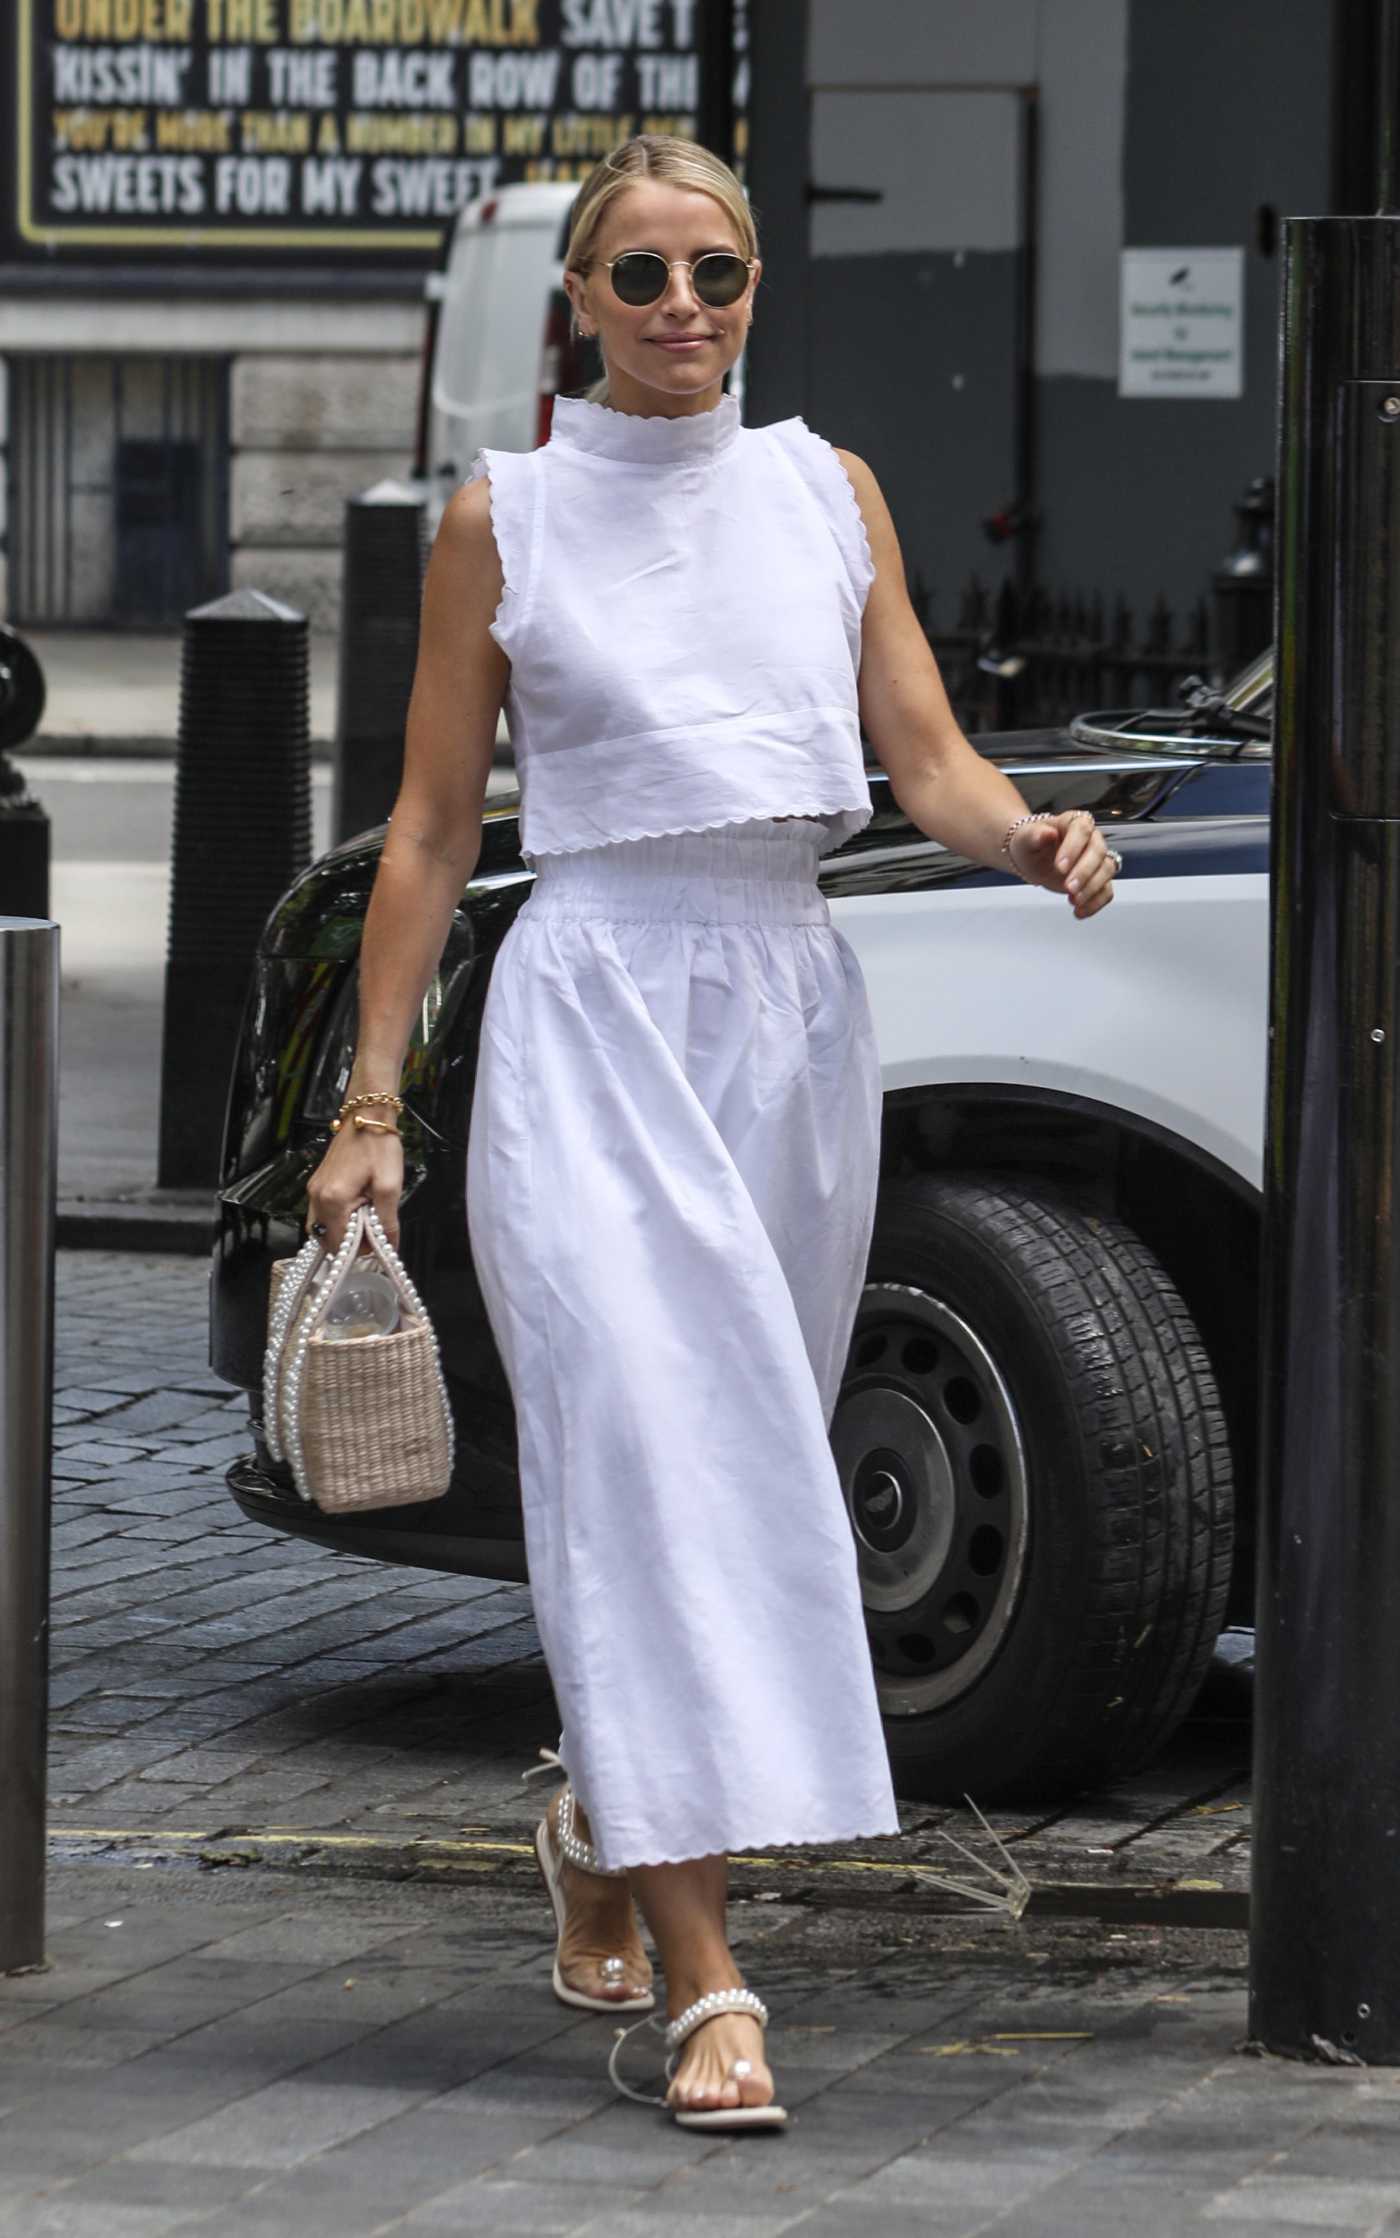 Vogue Williams in a White Ensemble Leaves the Global Radio in London 06/20/2022